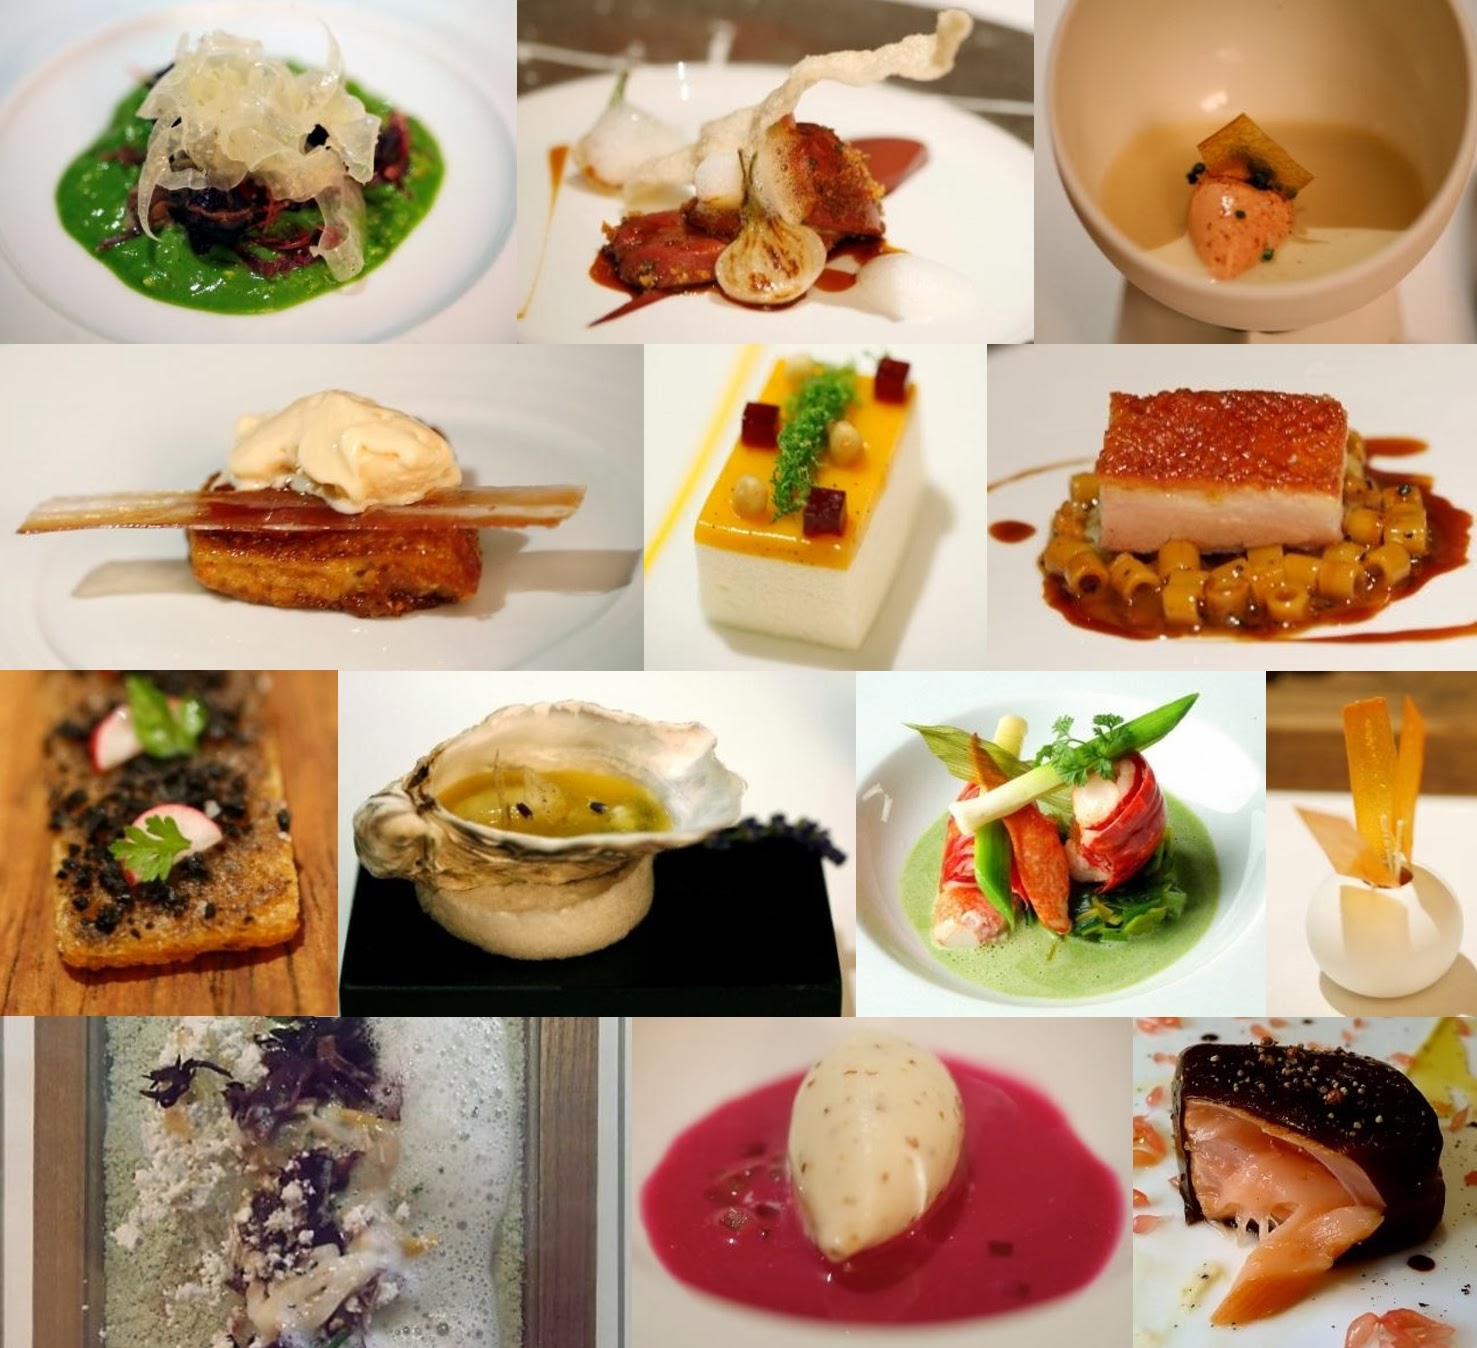 Dishes made by Michelin star restaurants